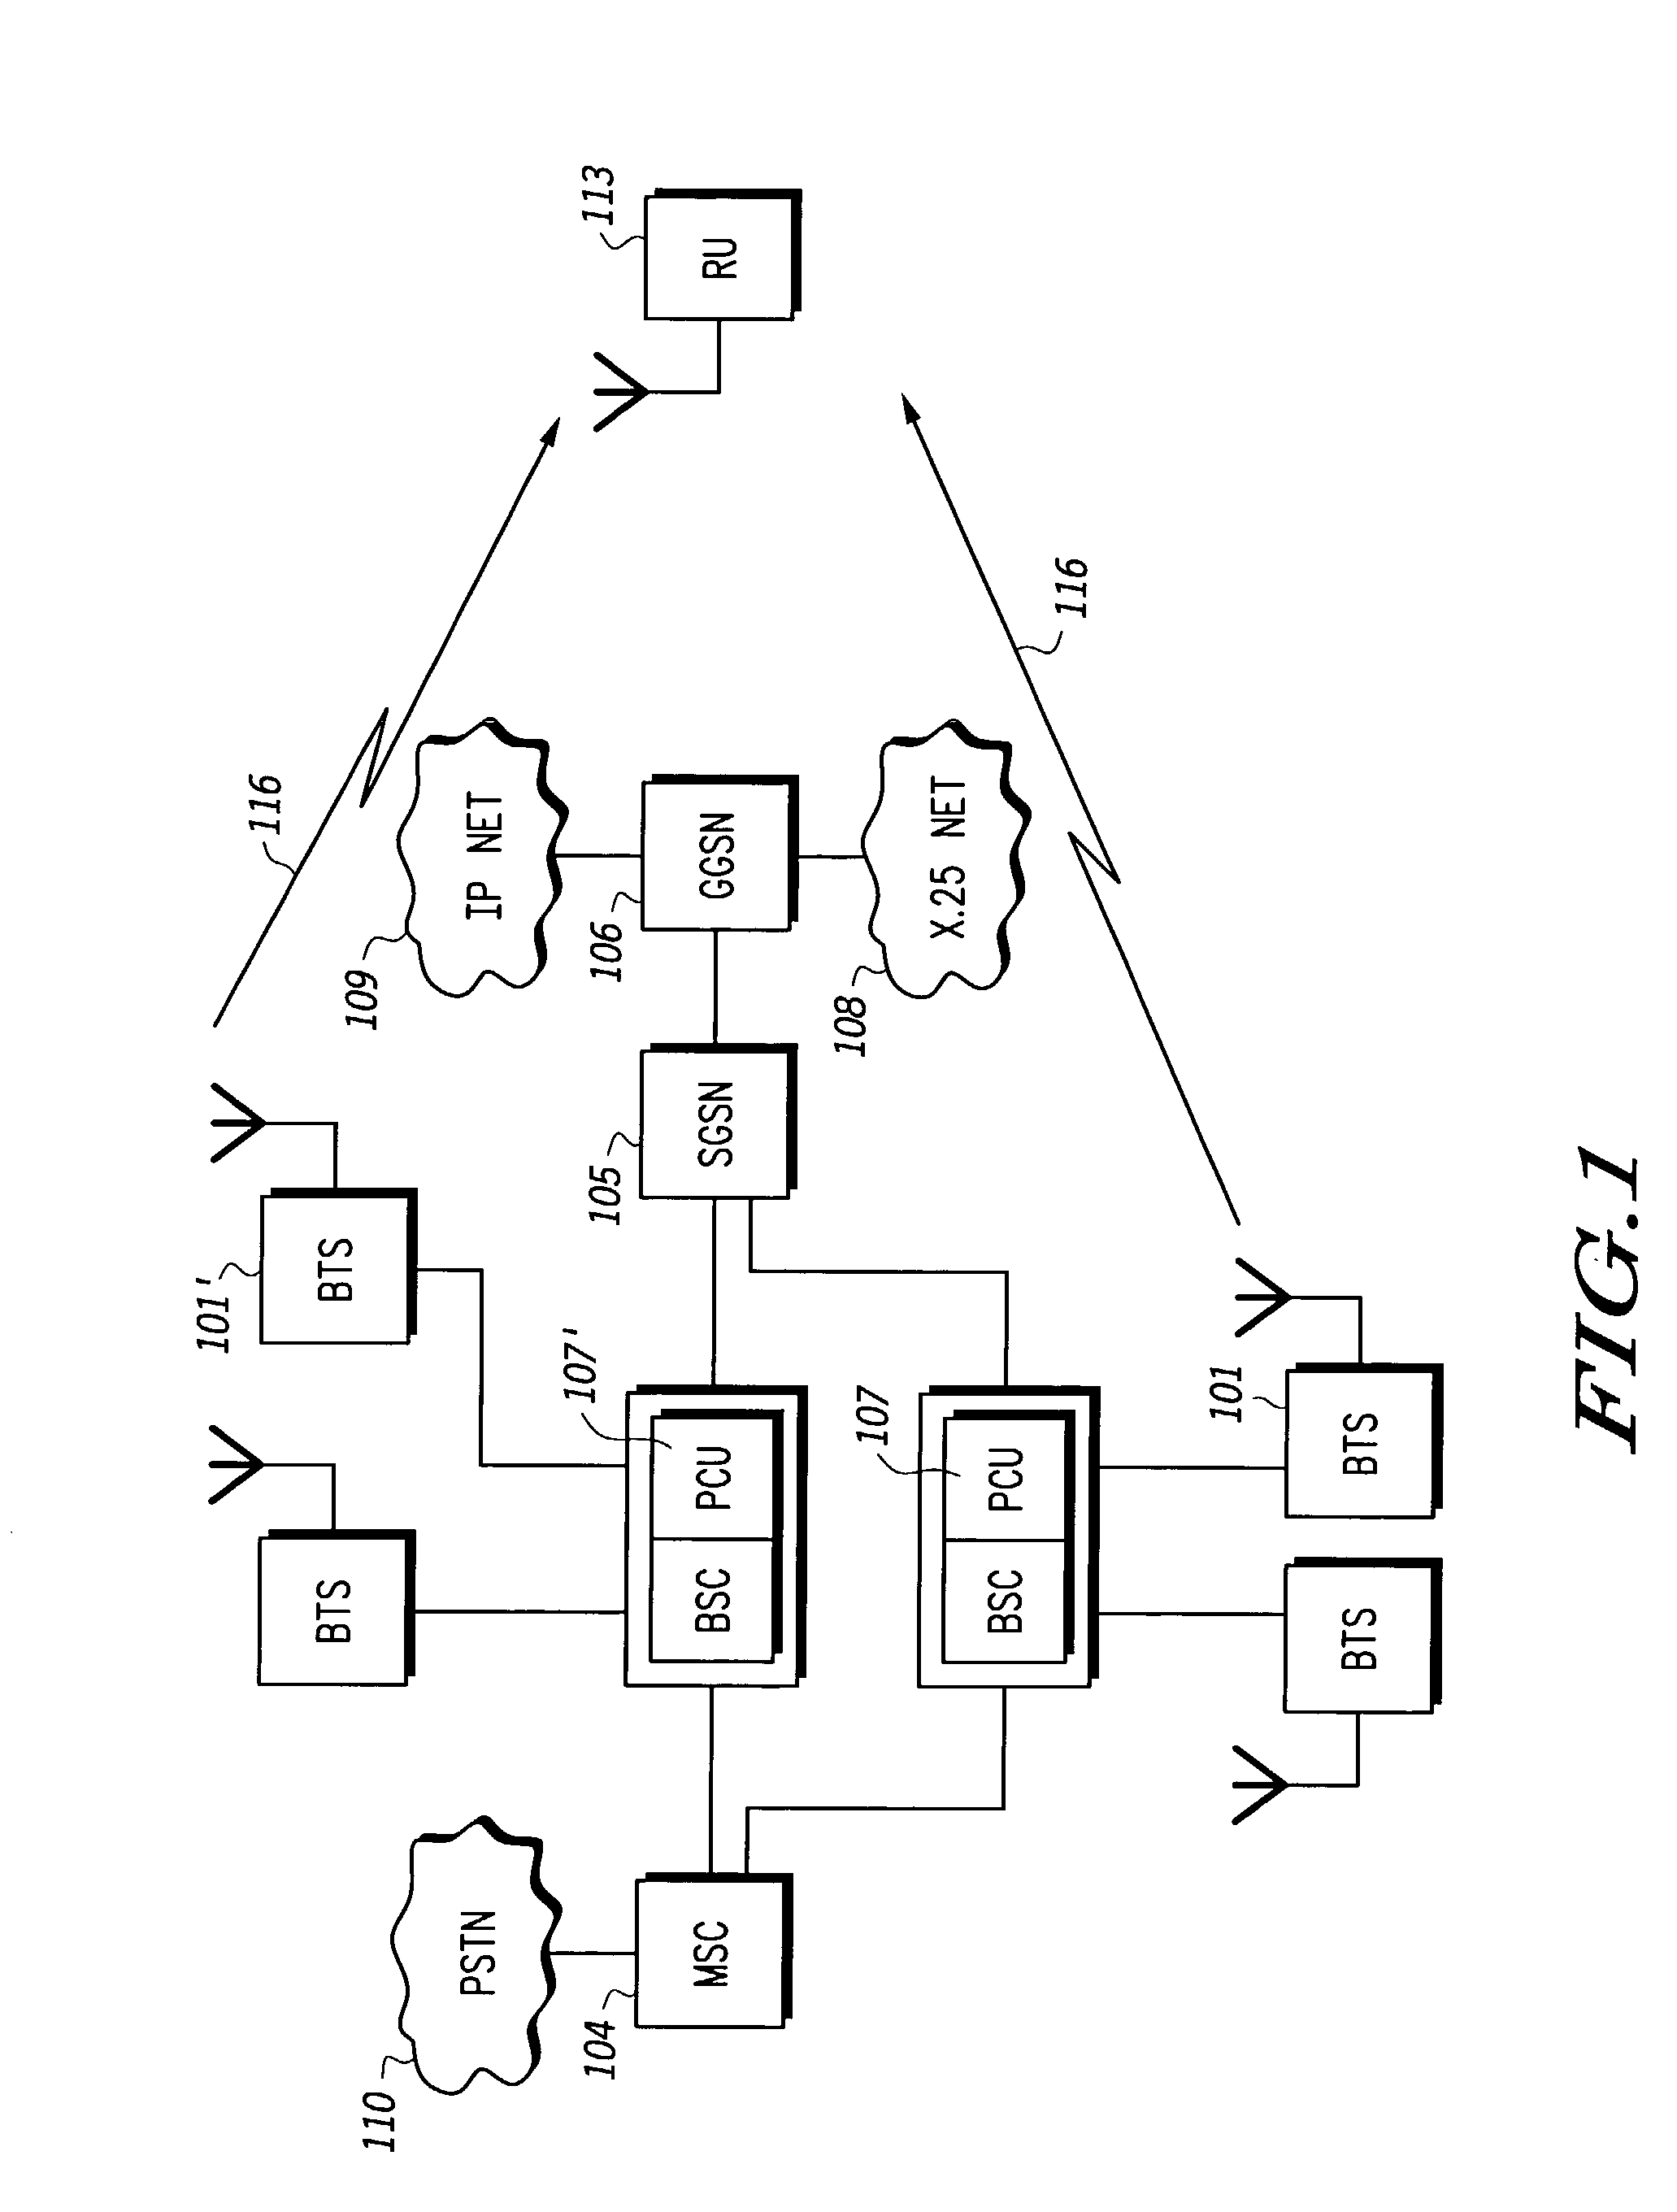 Method and apparatus for cell reselection within a communications system